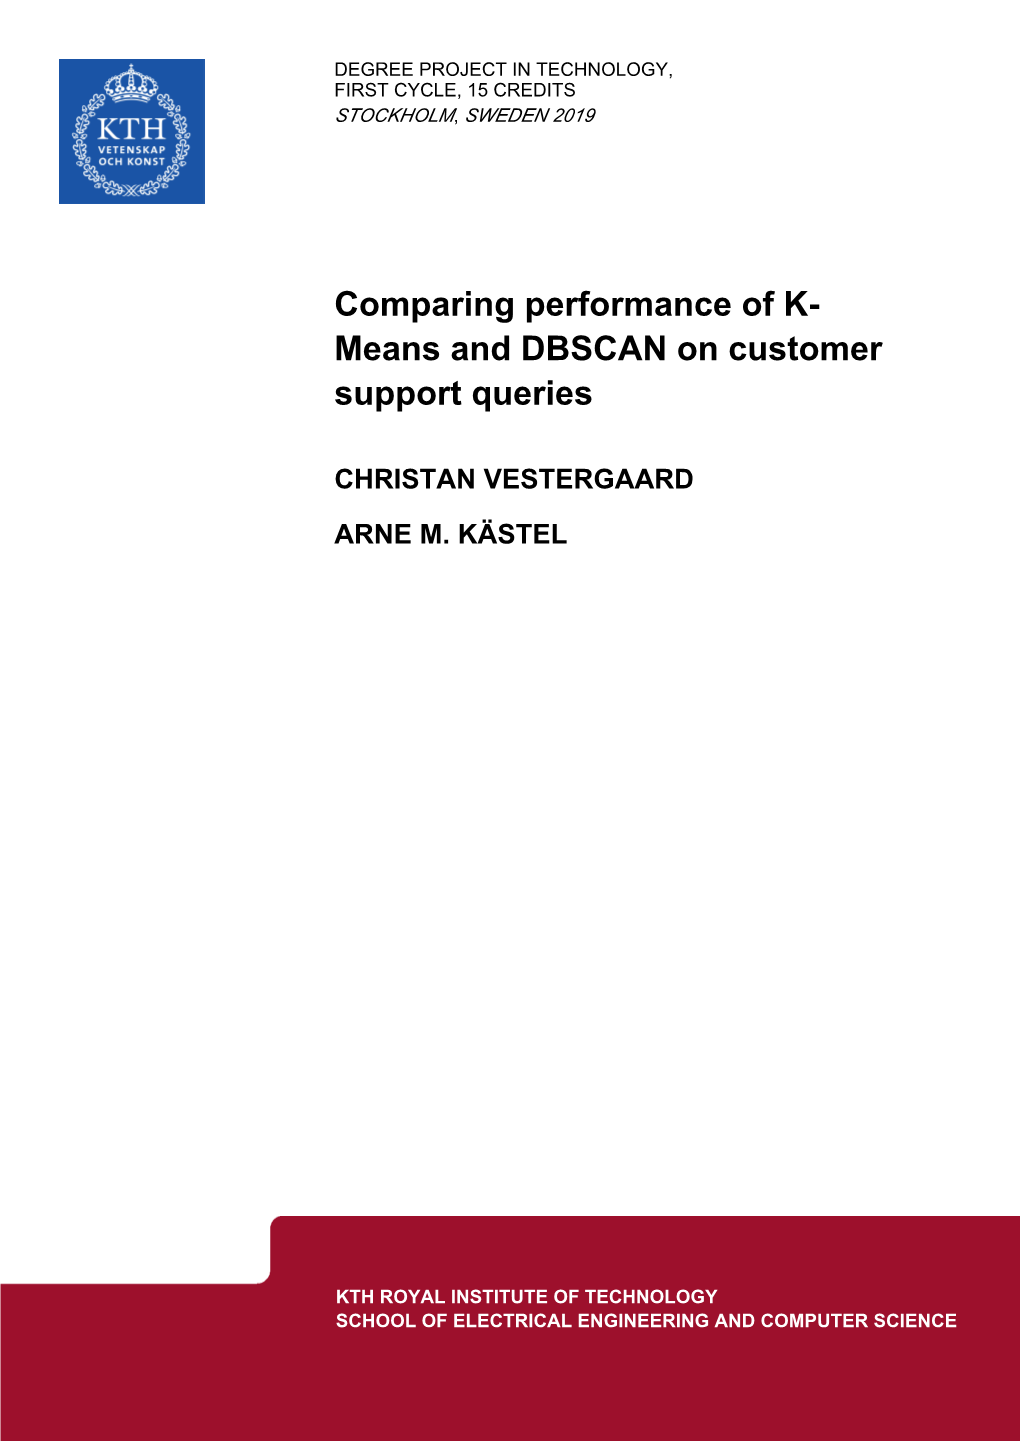 Comparing Performance of K- Means and DBSCAN on Customer Support Queries